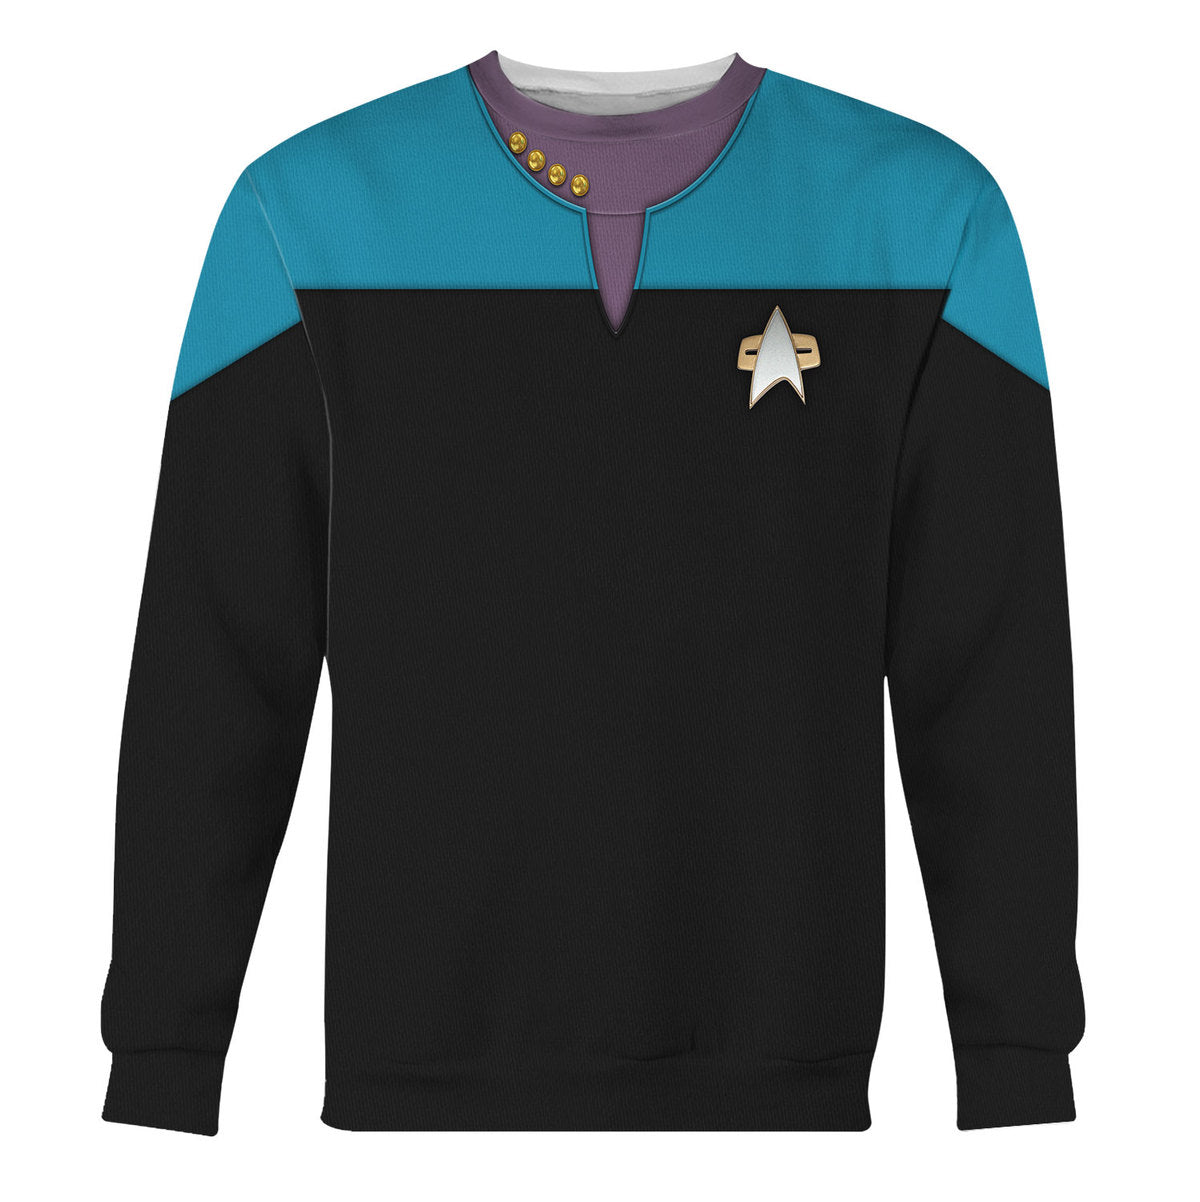 Star Trek Voyager Blue Costume Cool - Sweater - Ugly Christmas Sweater